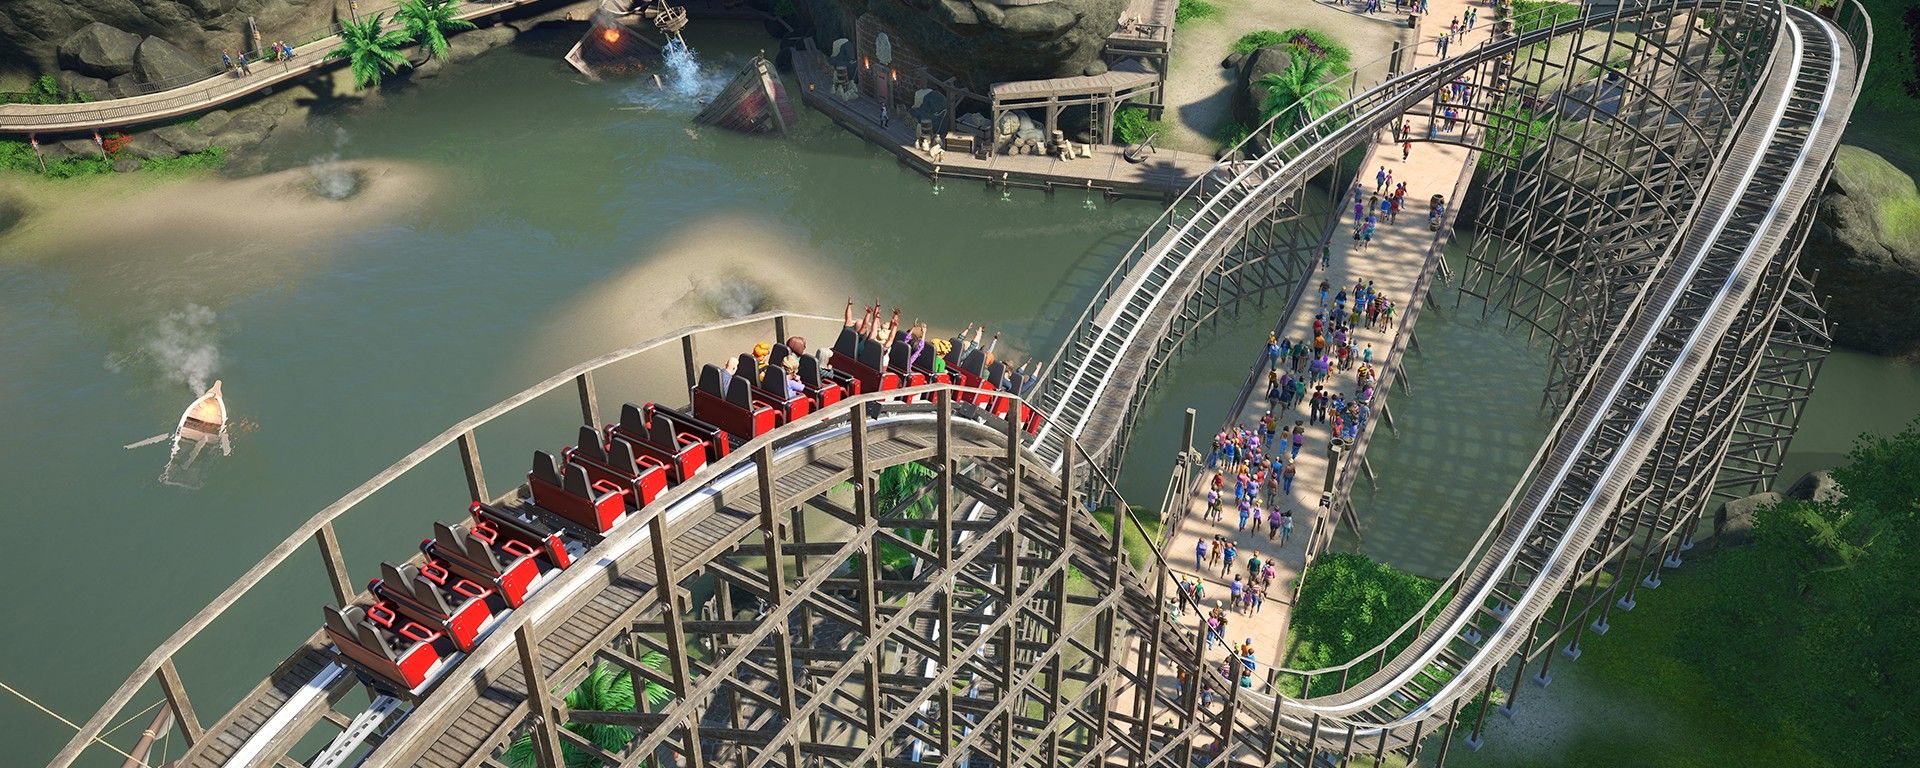 This Architect Has Recreated 30 Real World Coasters in 'Planet Coaster'